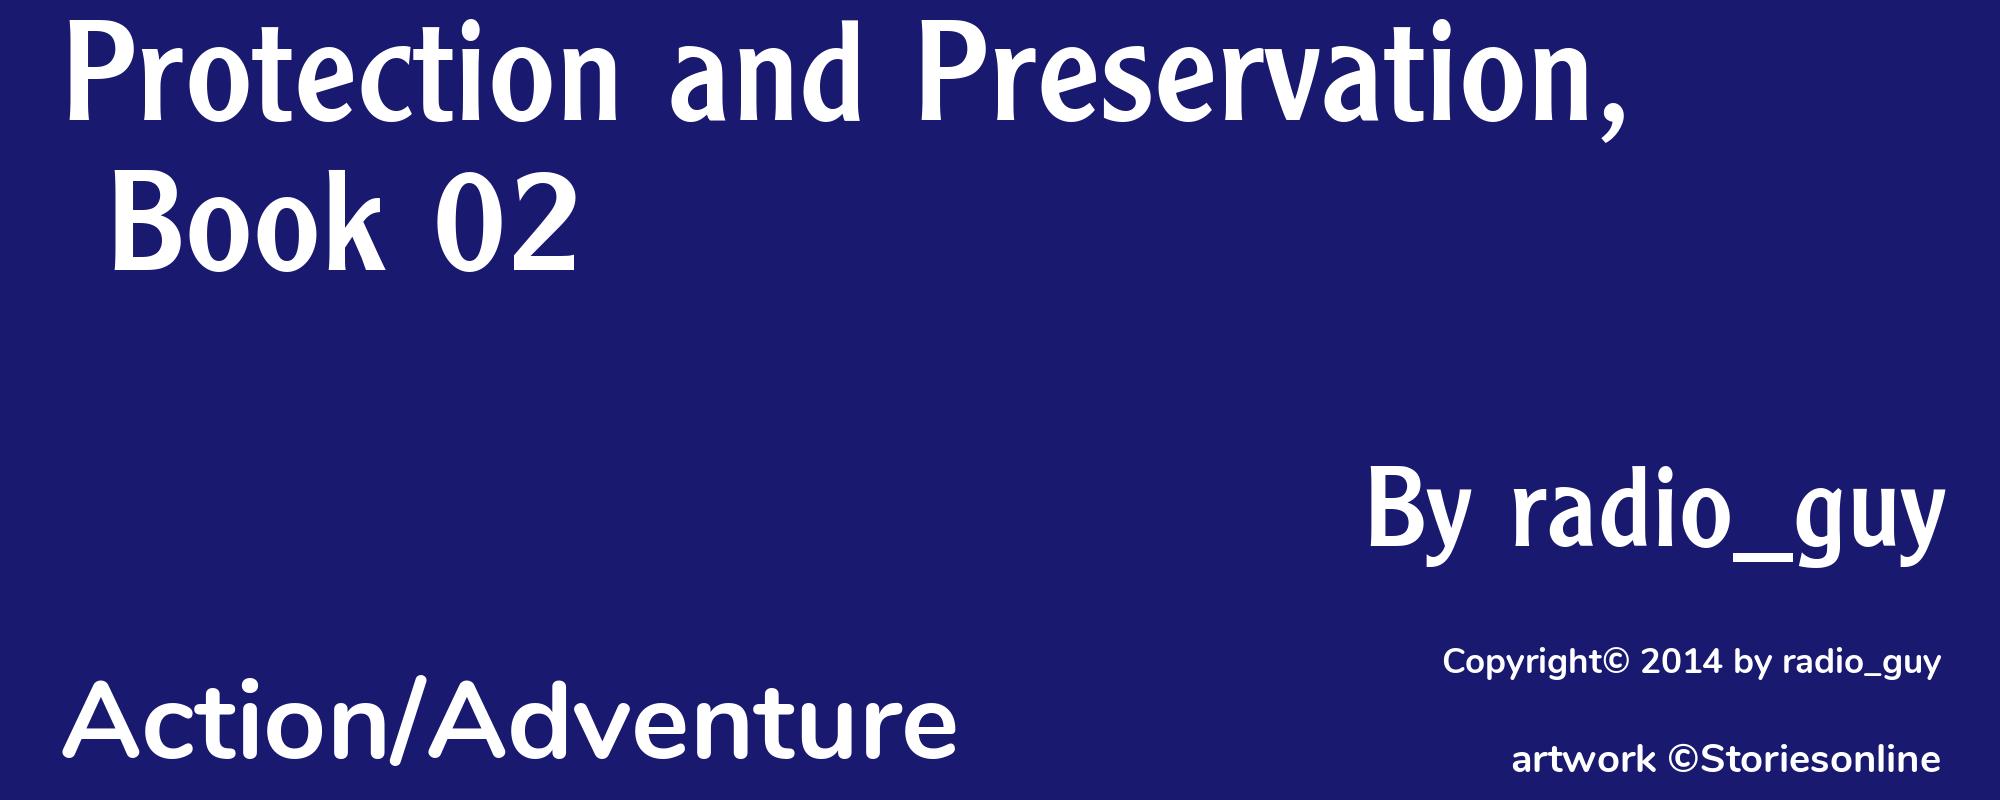 Protection and Preservation, Book 02 - Cover